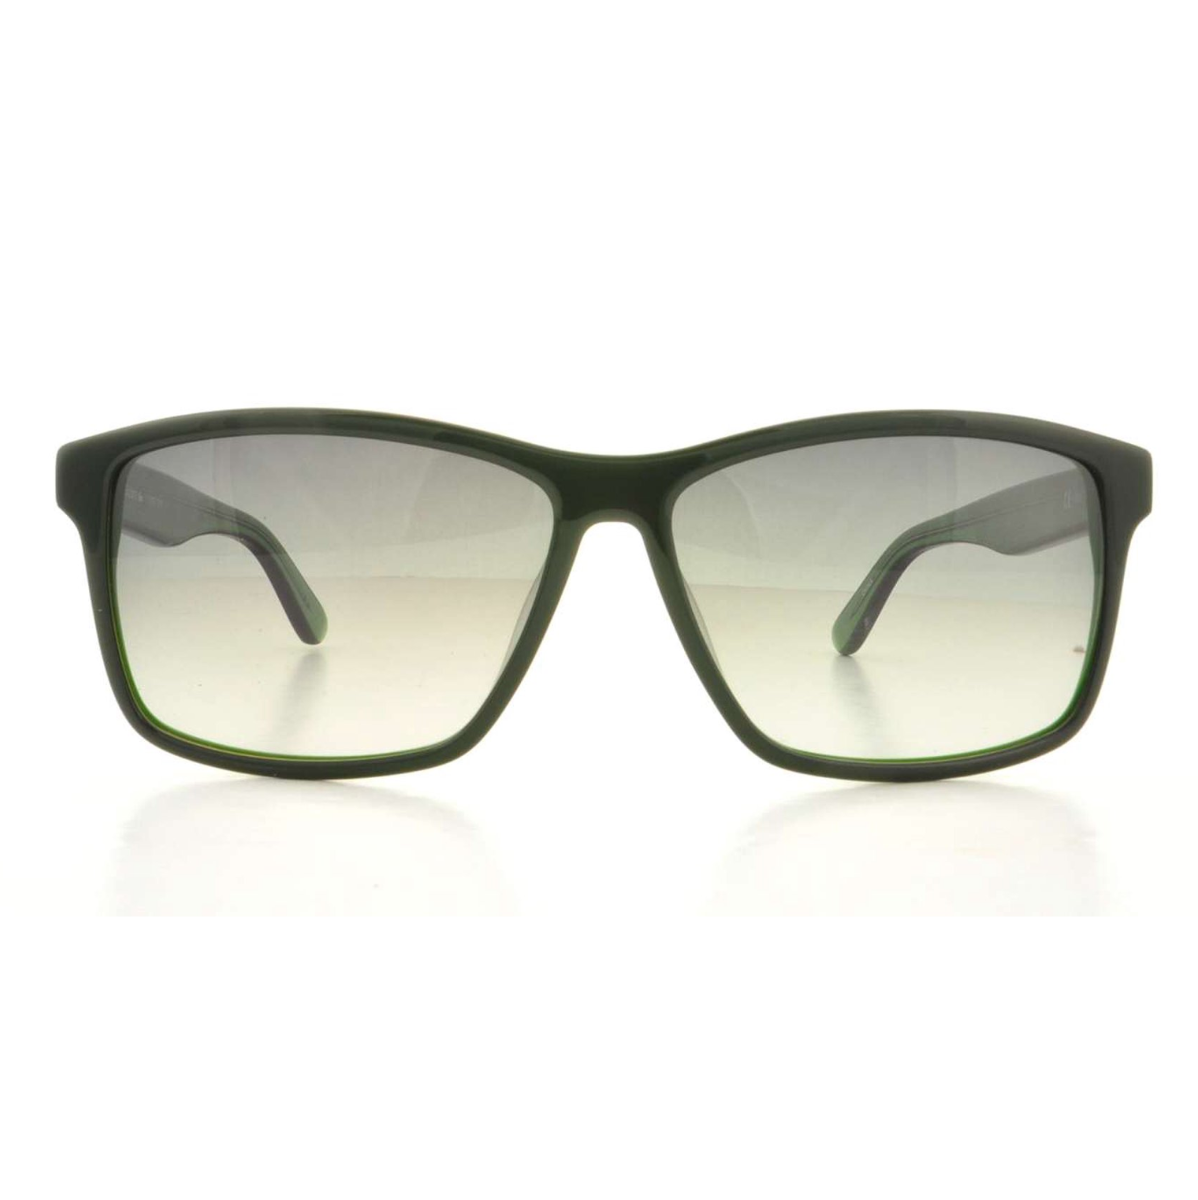 "Lacoste 705 Square Sunglasses: Stylish eyewear for men and women at Optorium. Non-polarized, light grey gradient lens with trendy green temple. Shop now!"